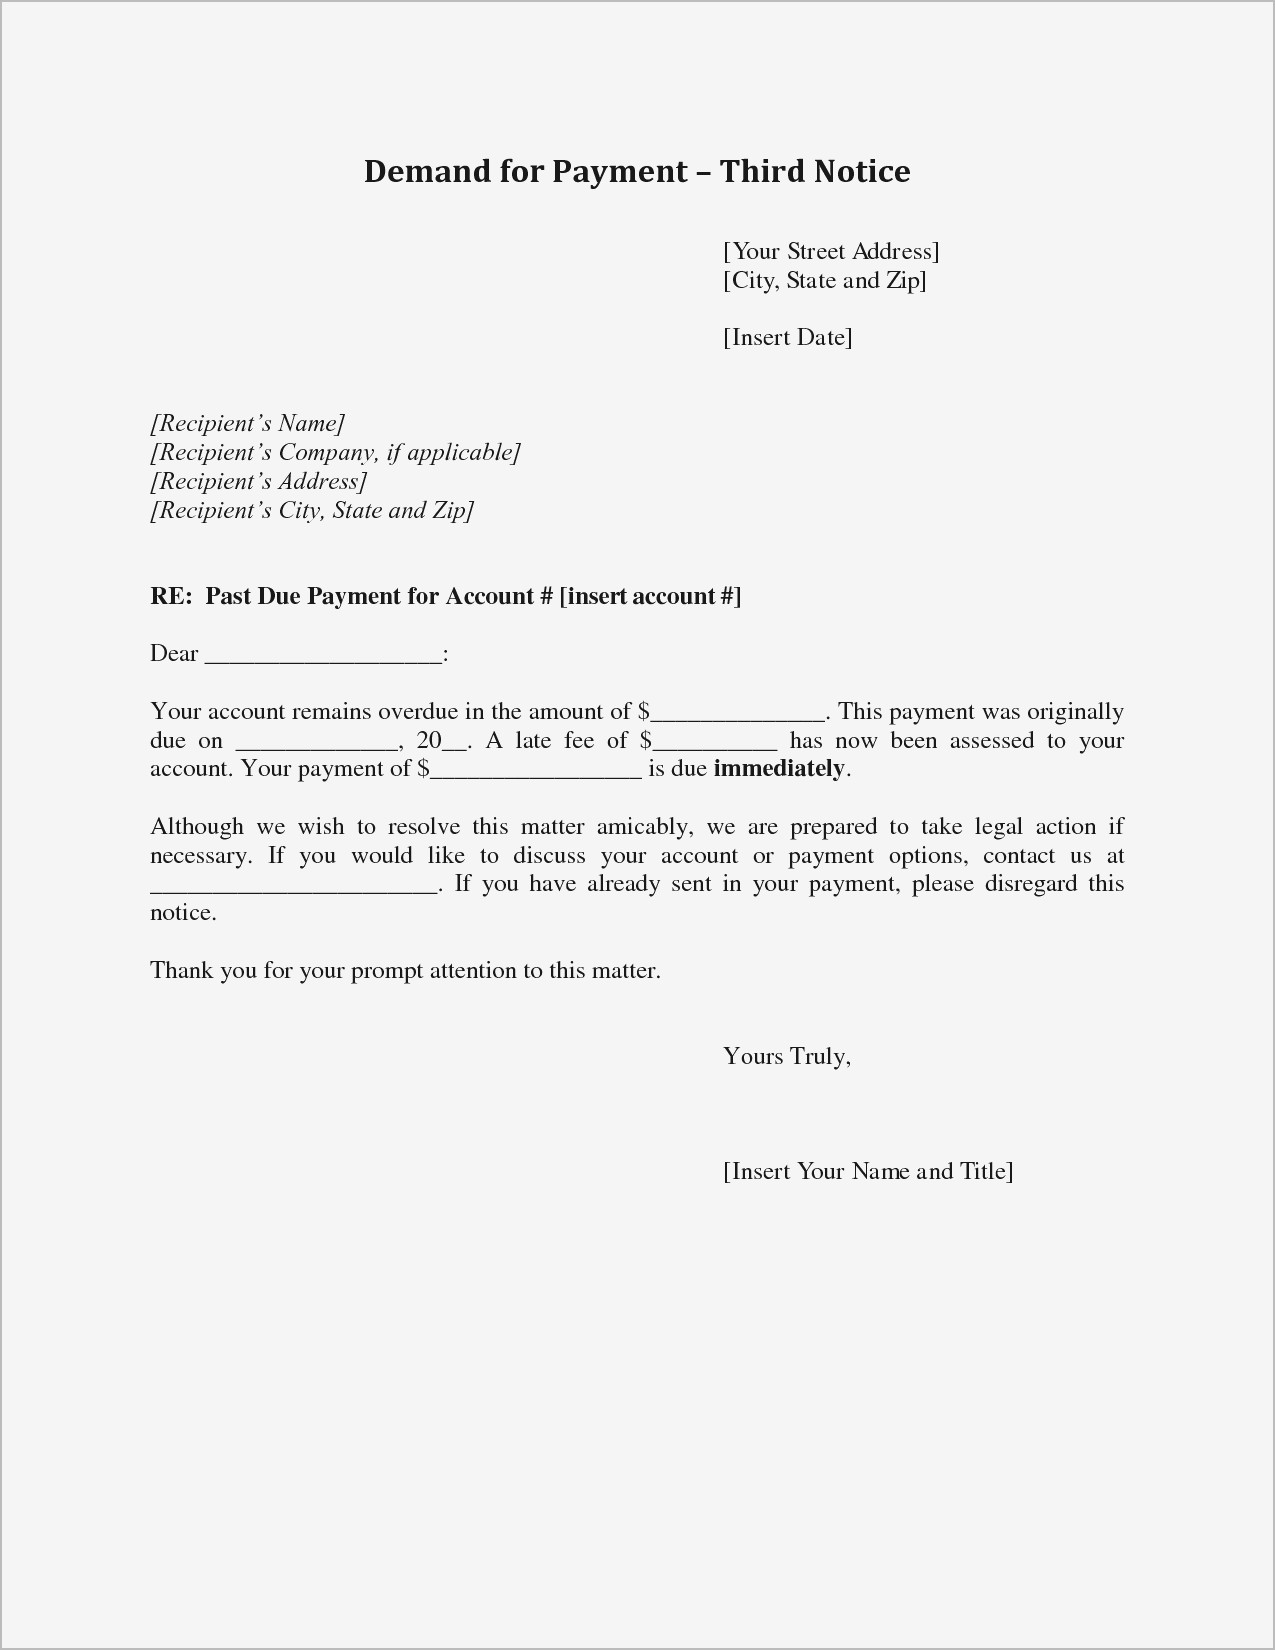 demand letter template for money owed Collection-sample demand letter for payment of debt Beautiful Sample Demand Letter for Money Owed Ideas for 11-b